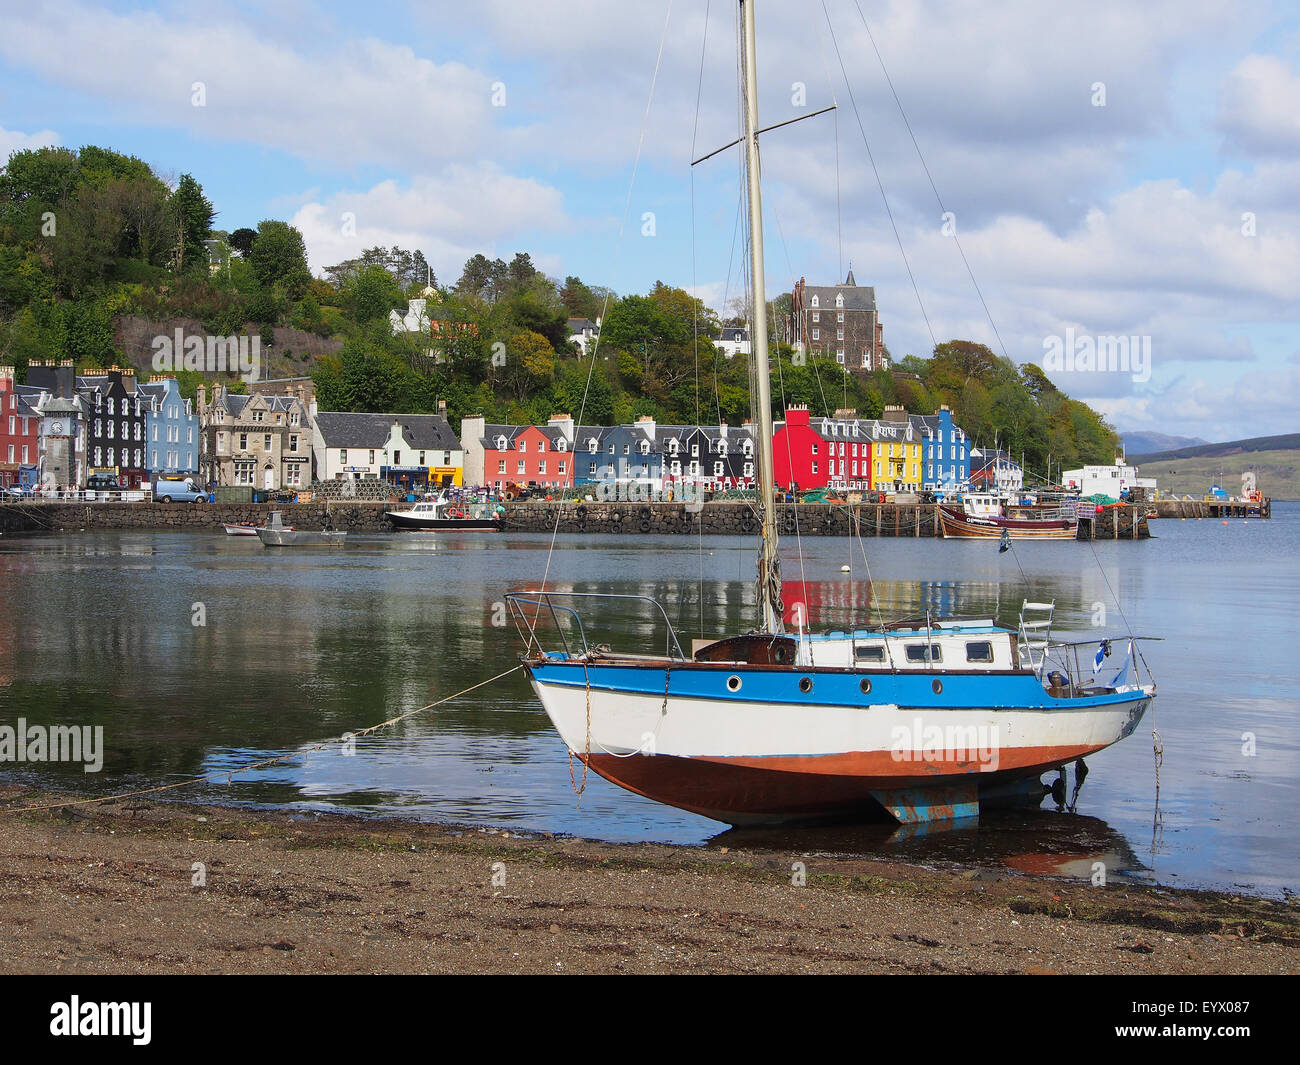 colourful-village-of-tobermory-on-the-is